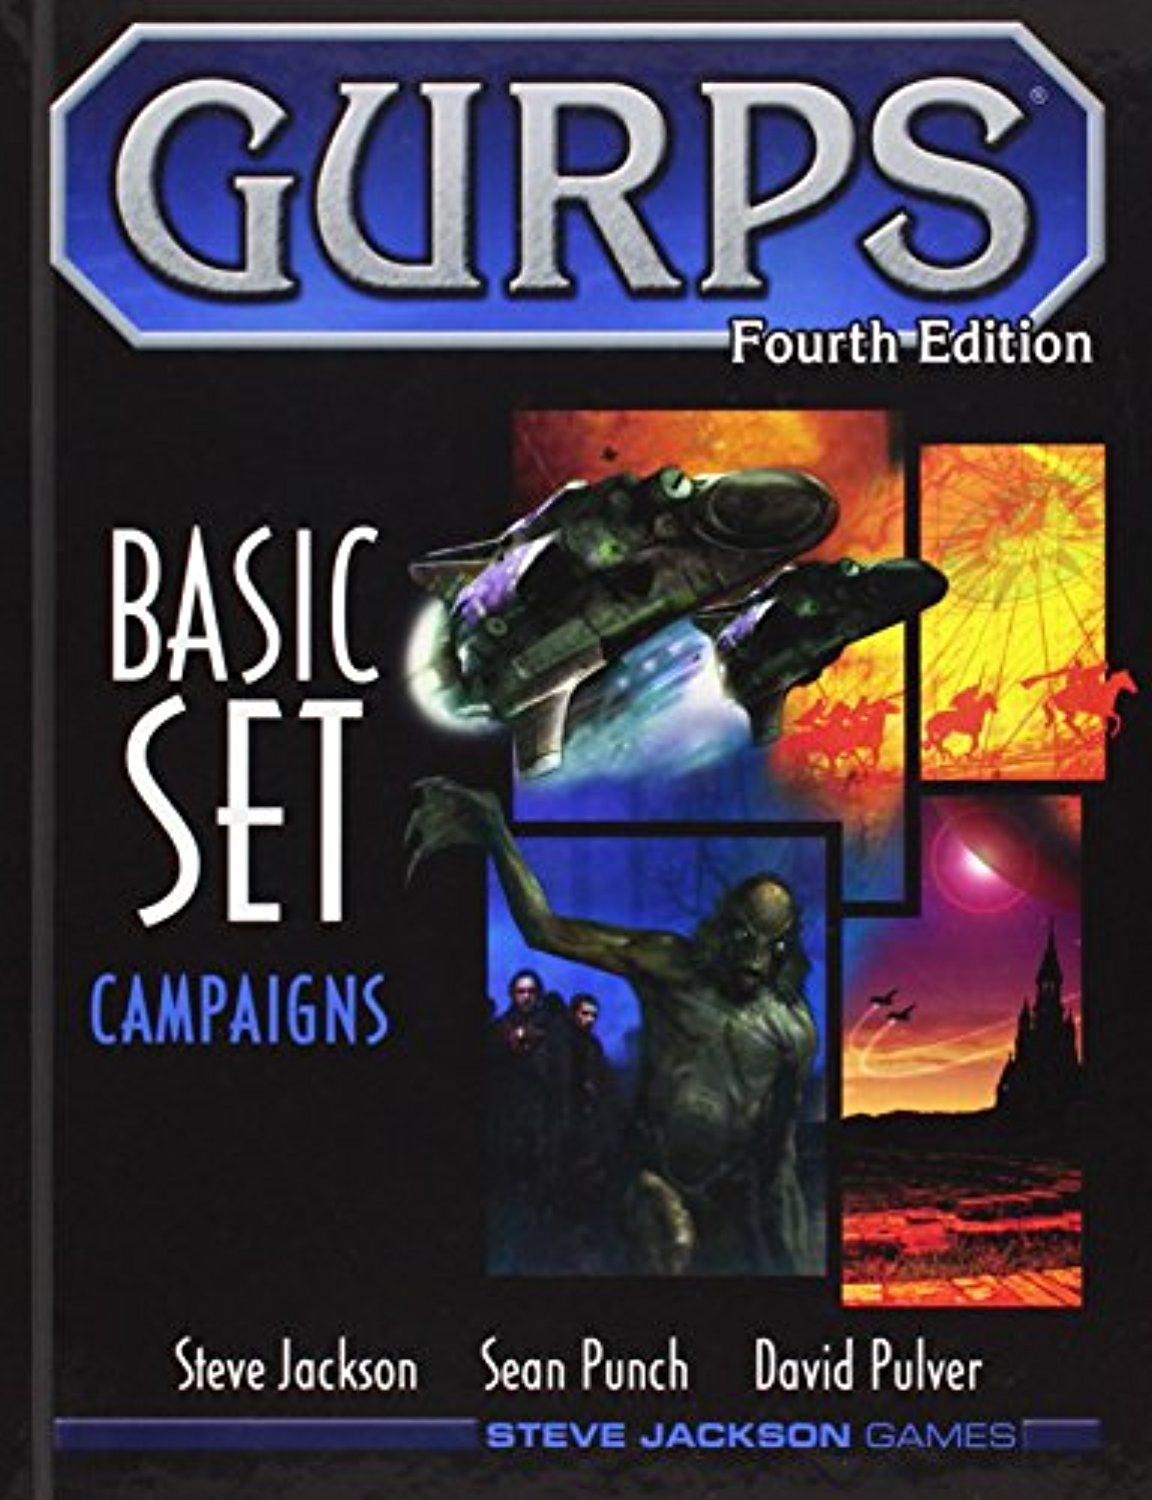 GURPS BASIC SET Campaigns (GURPS: Generic Universal Role Playing System) by Steve Jackson - image 4 of 4